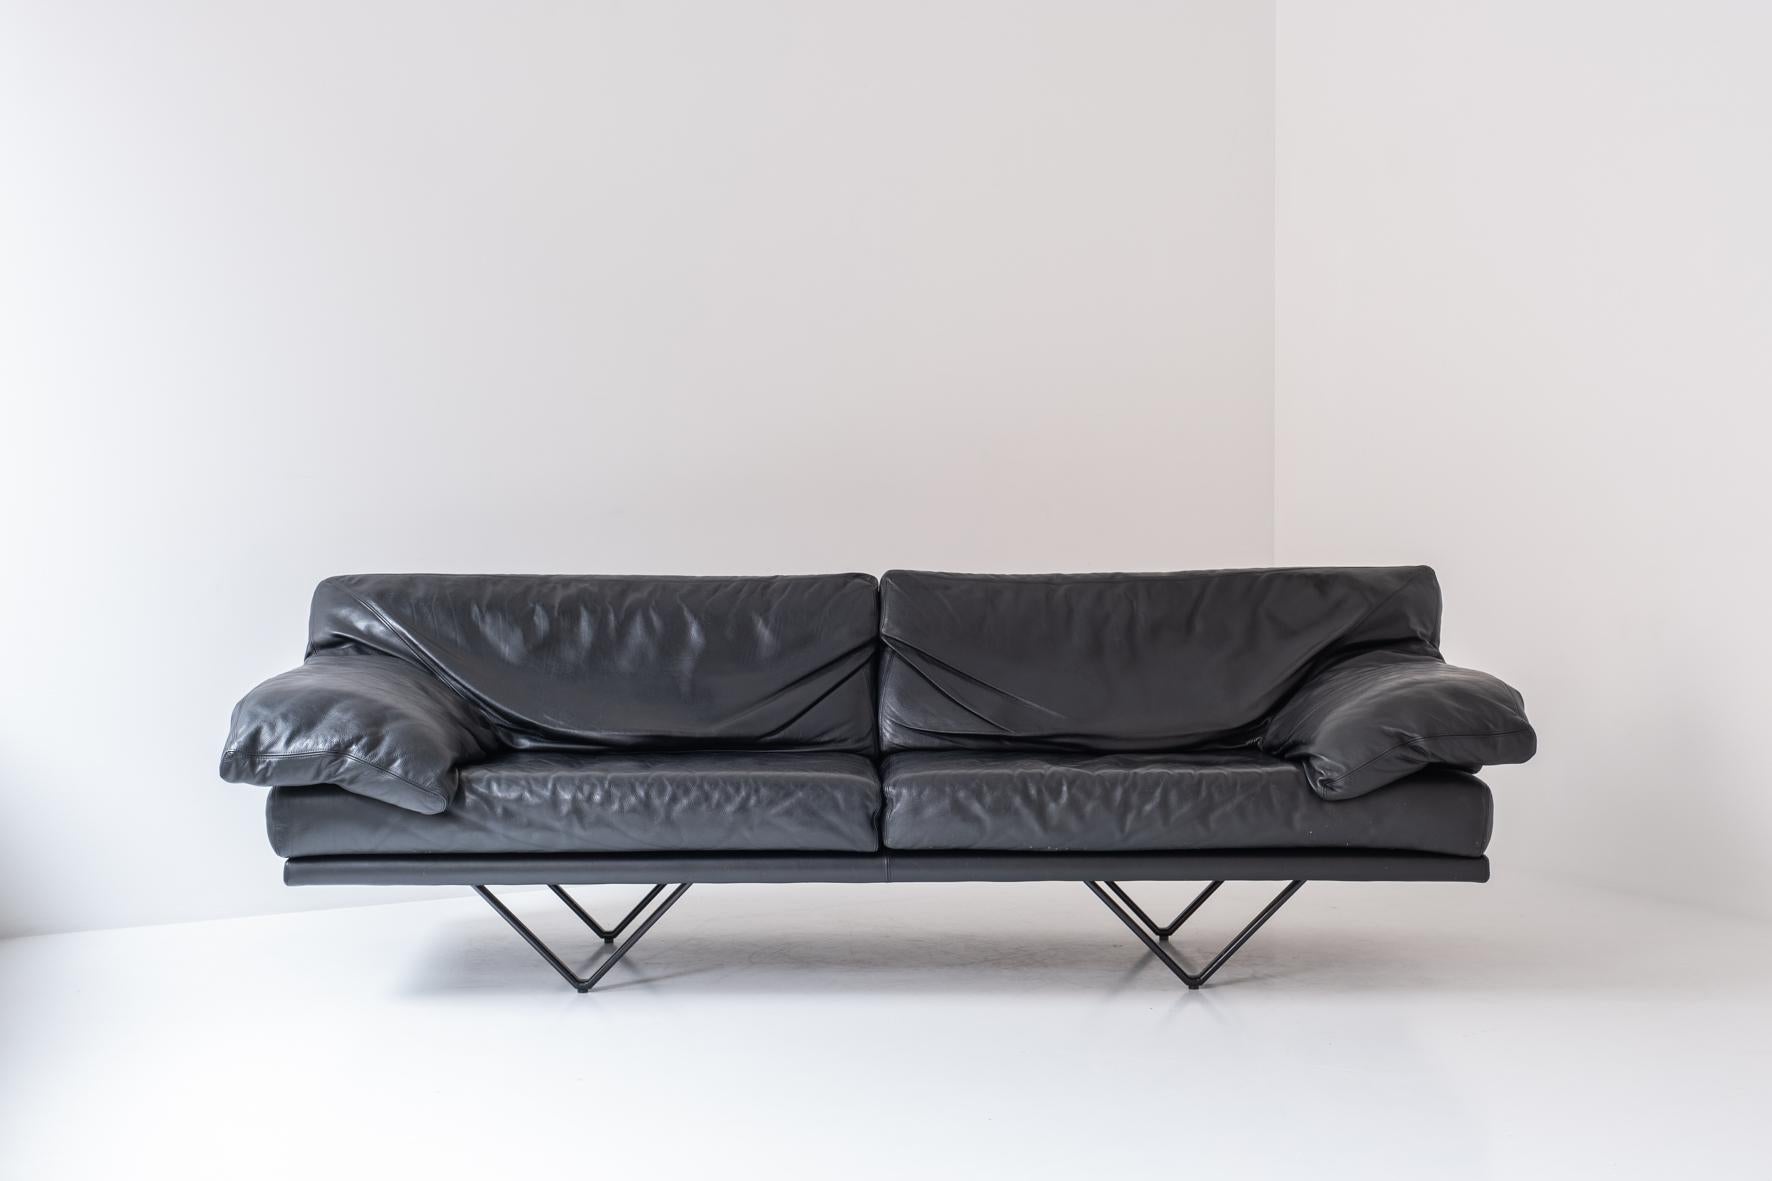 Large 3-seater, model ‘Cornelius’ by Durlet, Belgium 1980s. This sofa has a black lacquered triangle shaped base and features the original black leather upholstery. Well presented condition. Labeled inside.